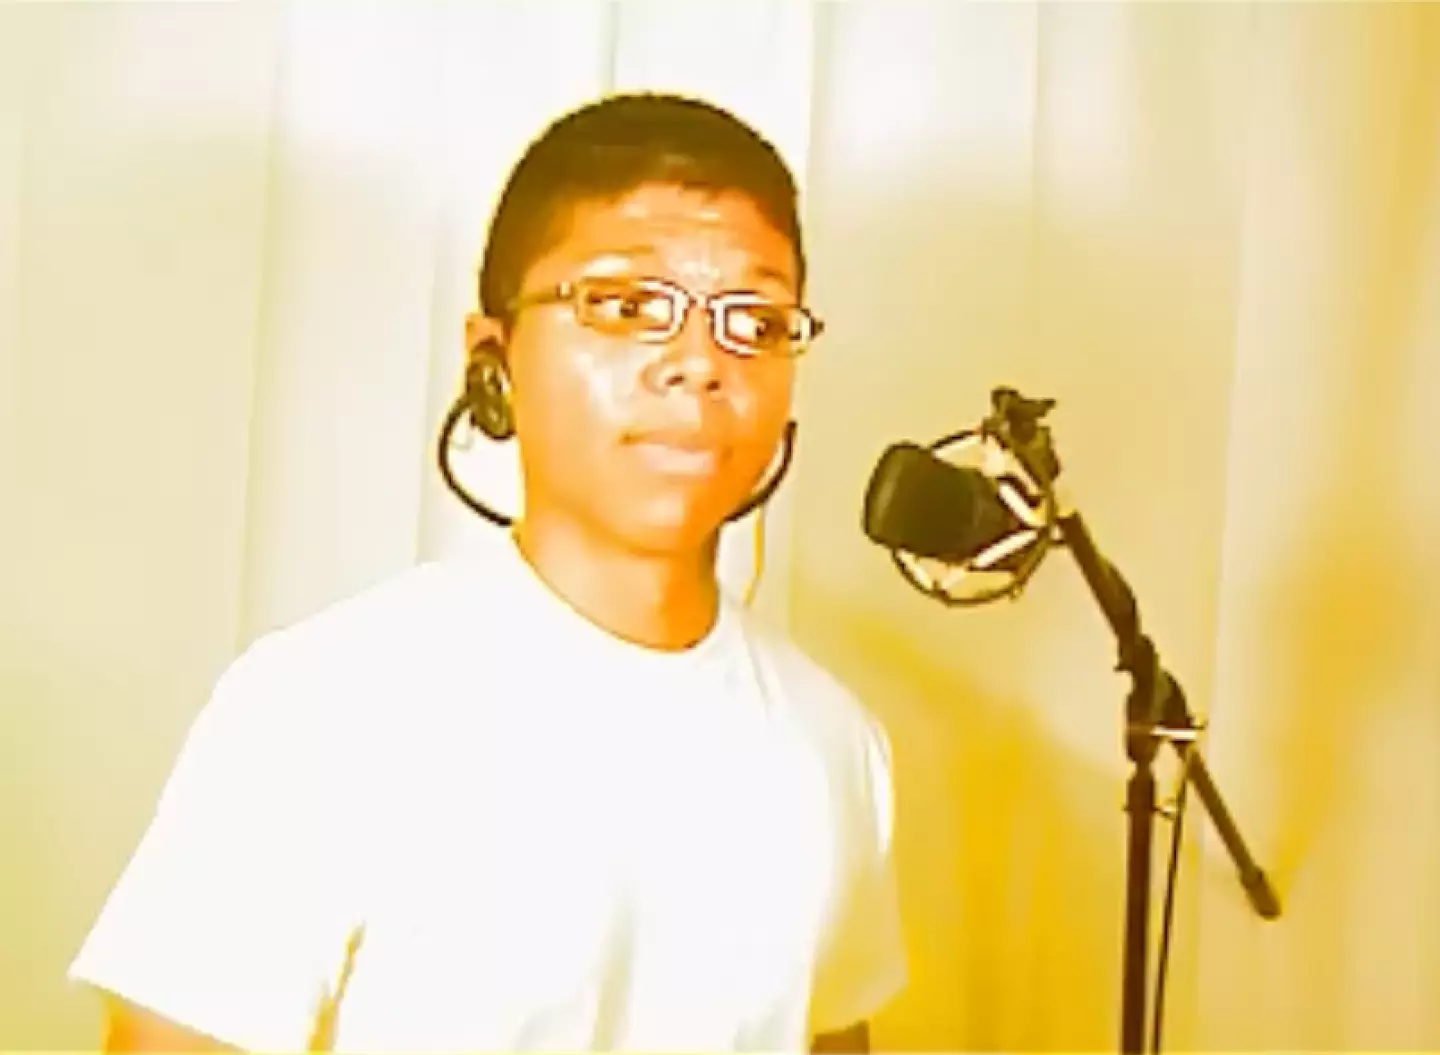 Zonday in the 2007 video. (YouTube / Tay Zonday)